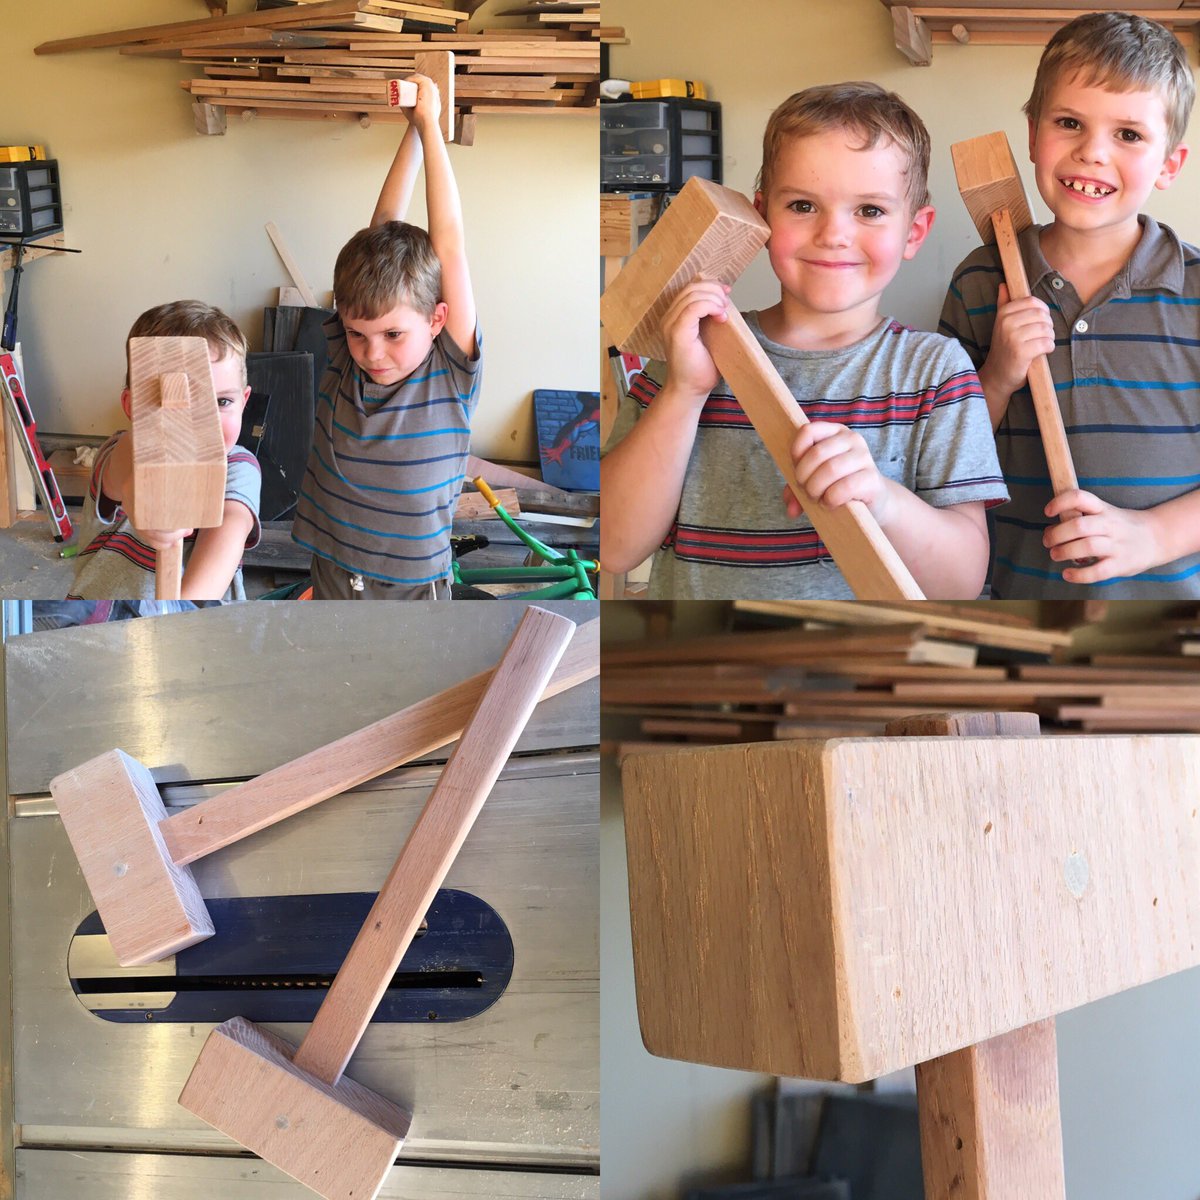 The boys wanted a wooden mallet so I made them each one this evening. Not bad for a quick project. #diy #woodworking #woodenmallet